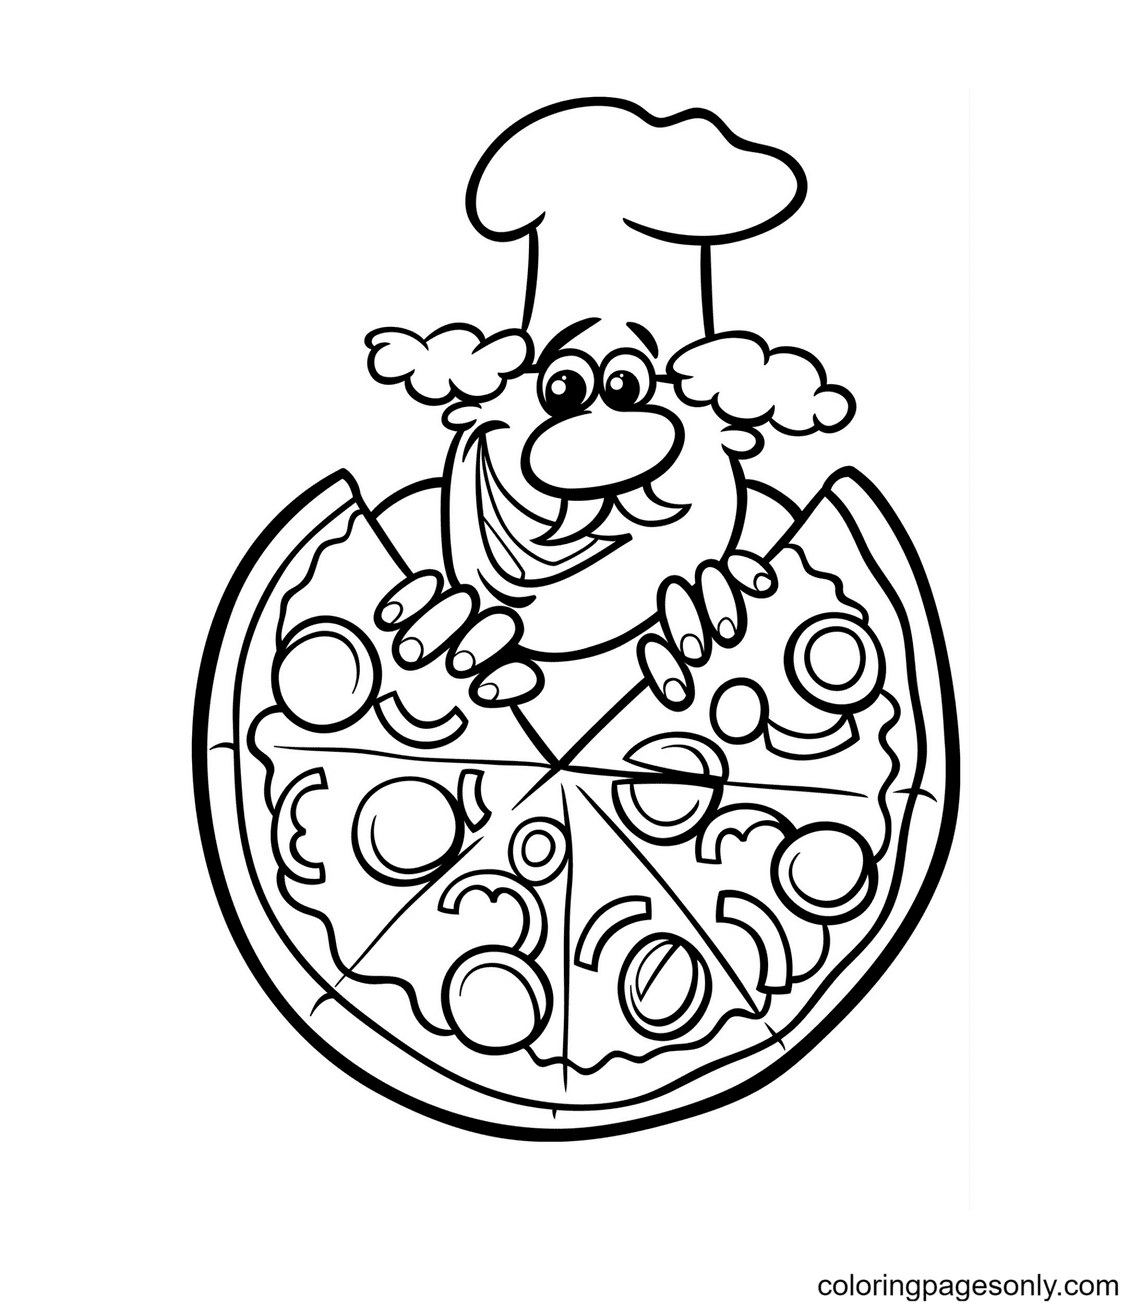 Pizza and Chef Coloring Page